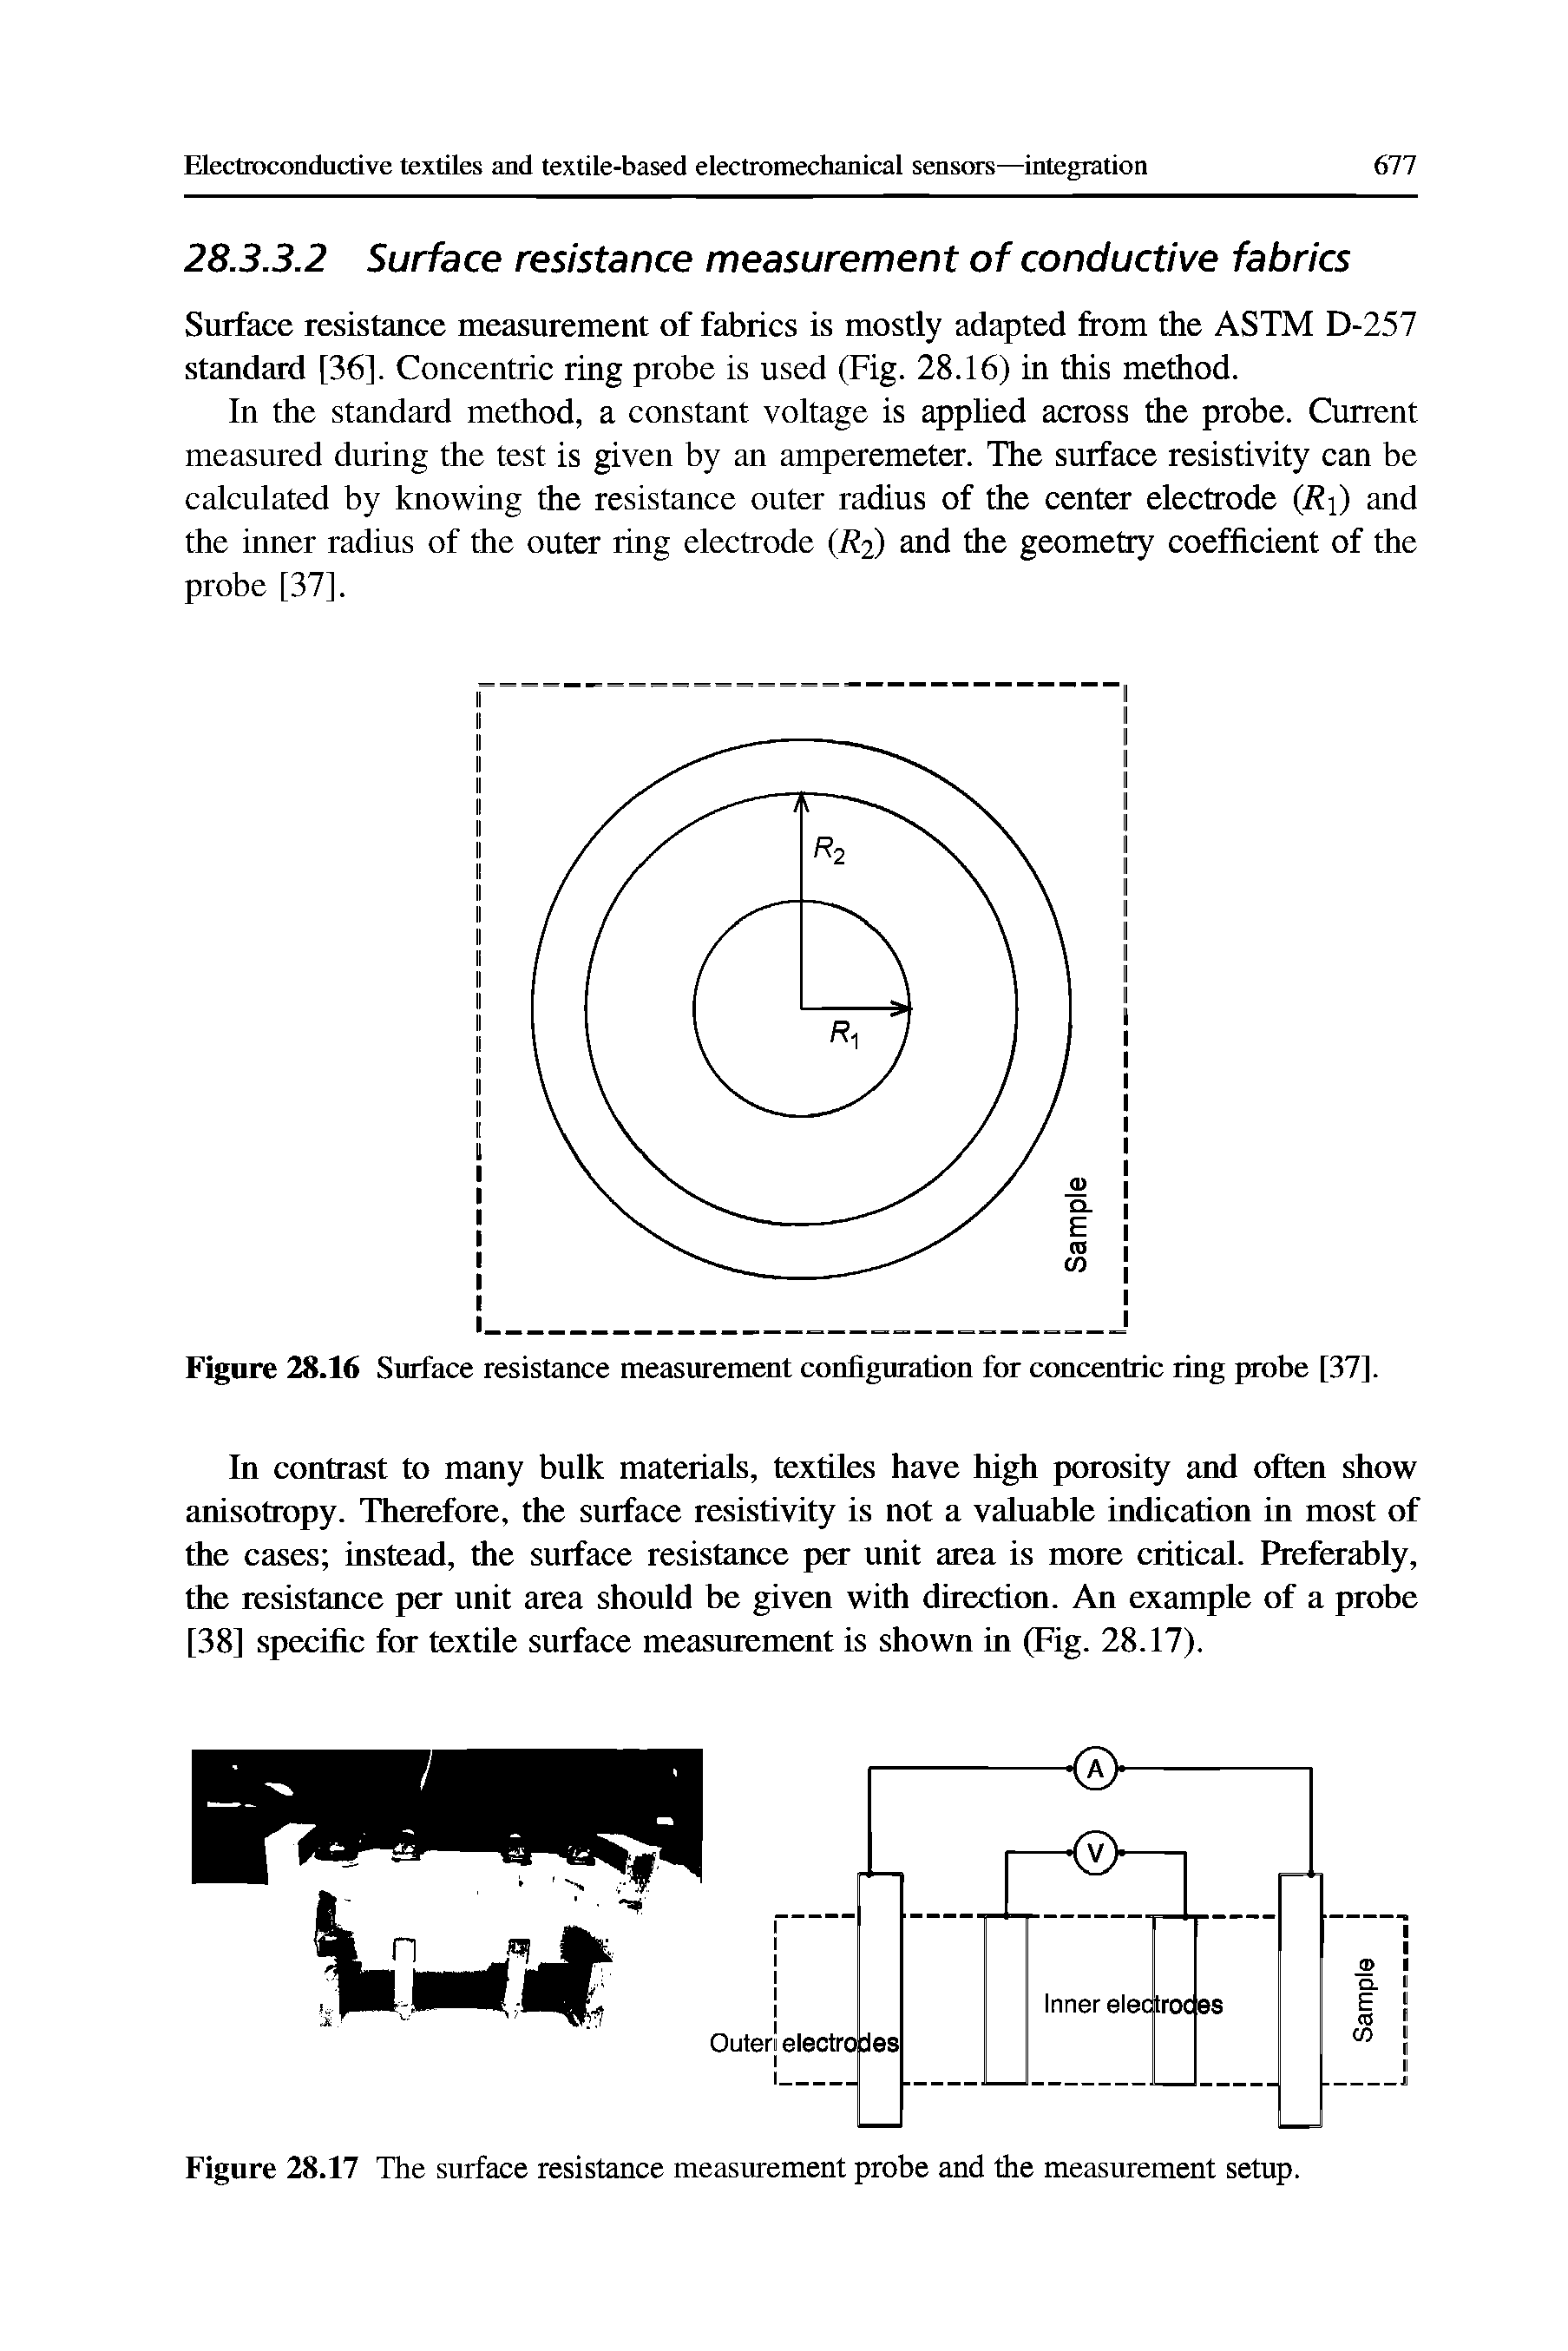 Figure 28.16 Surface resistance measurement configuration for concentric ring probe [37].